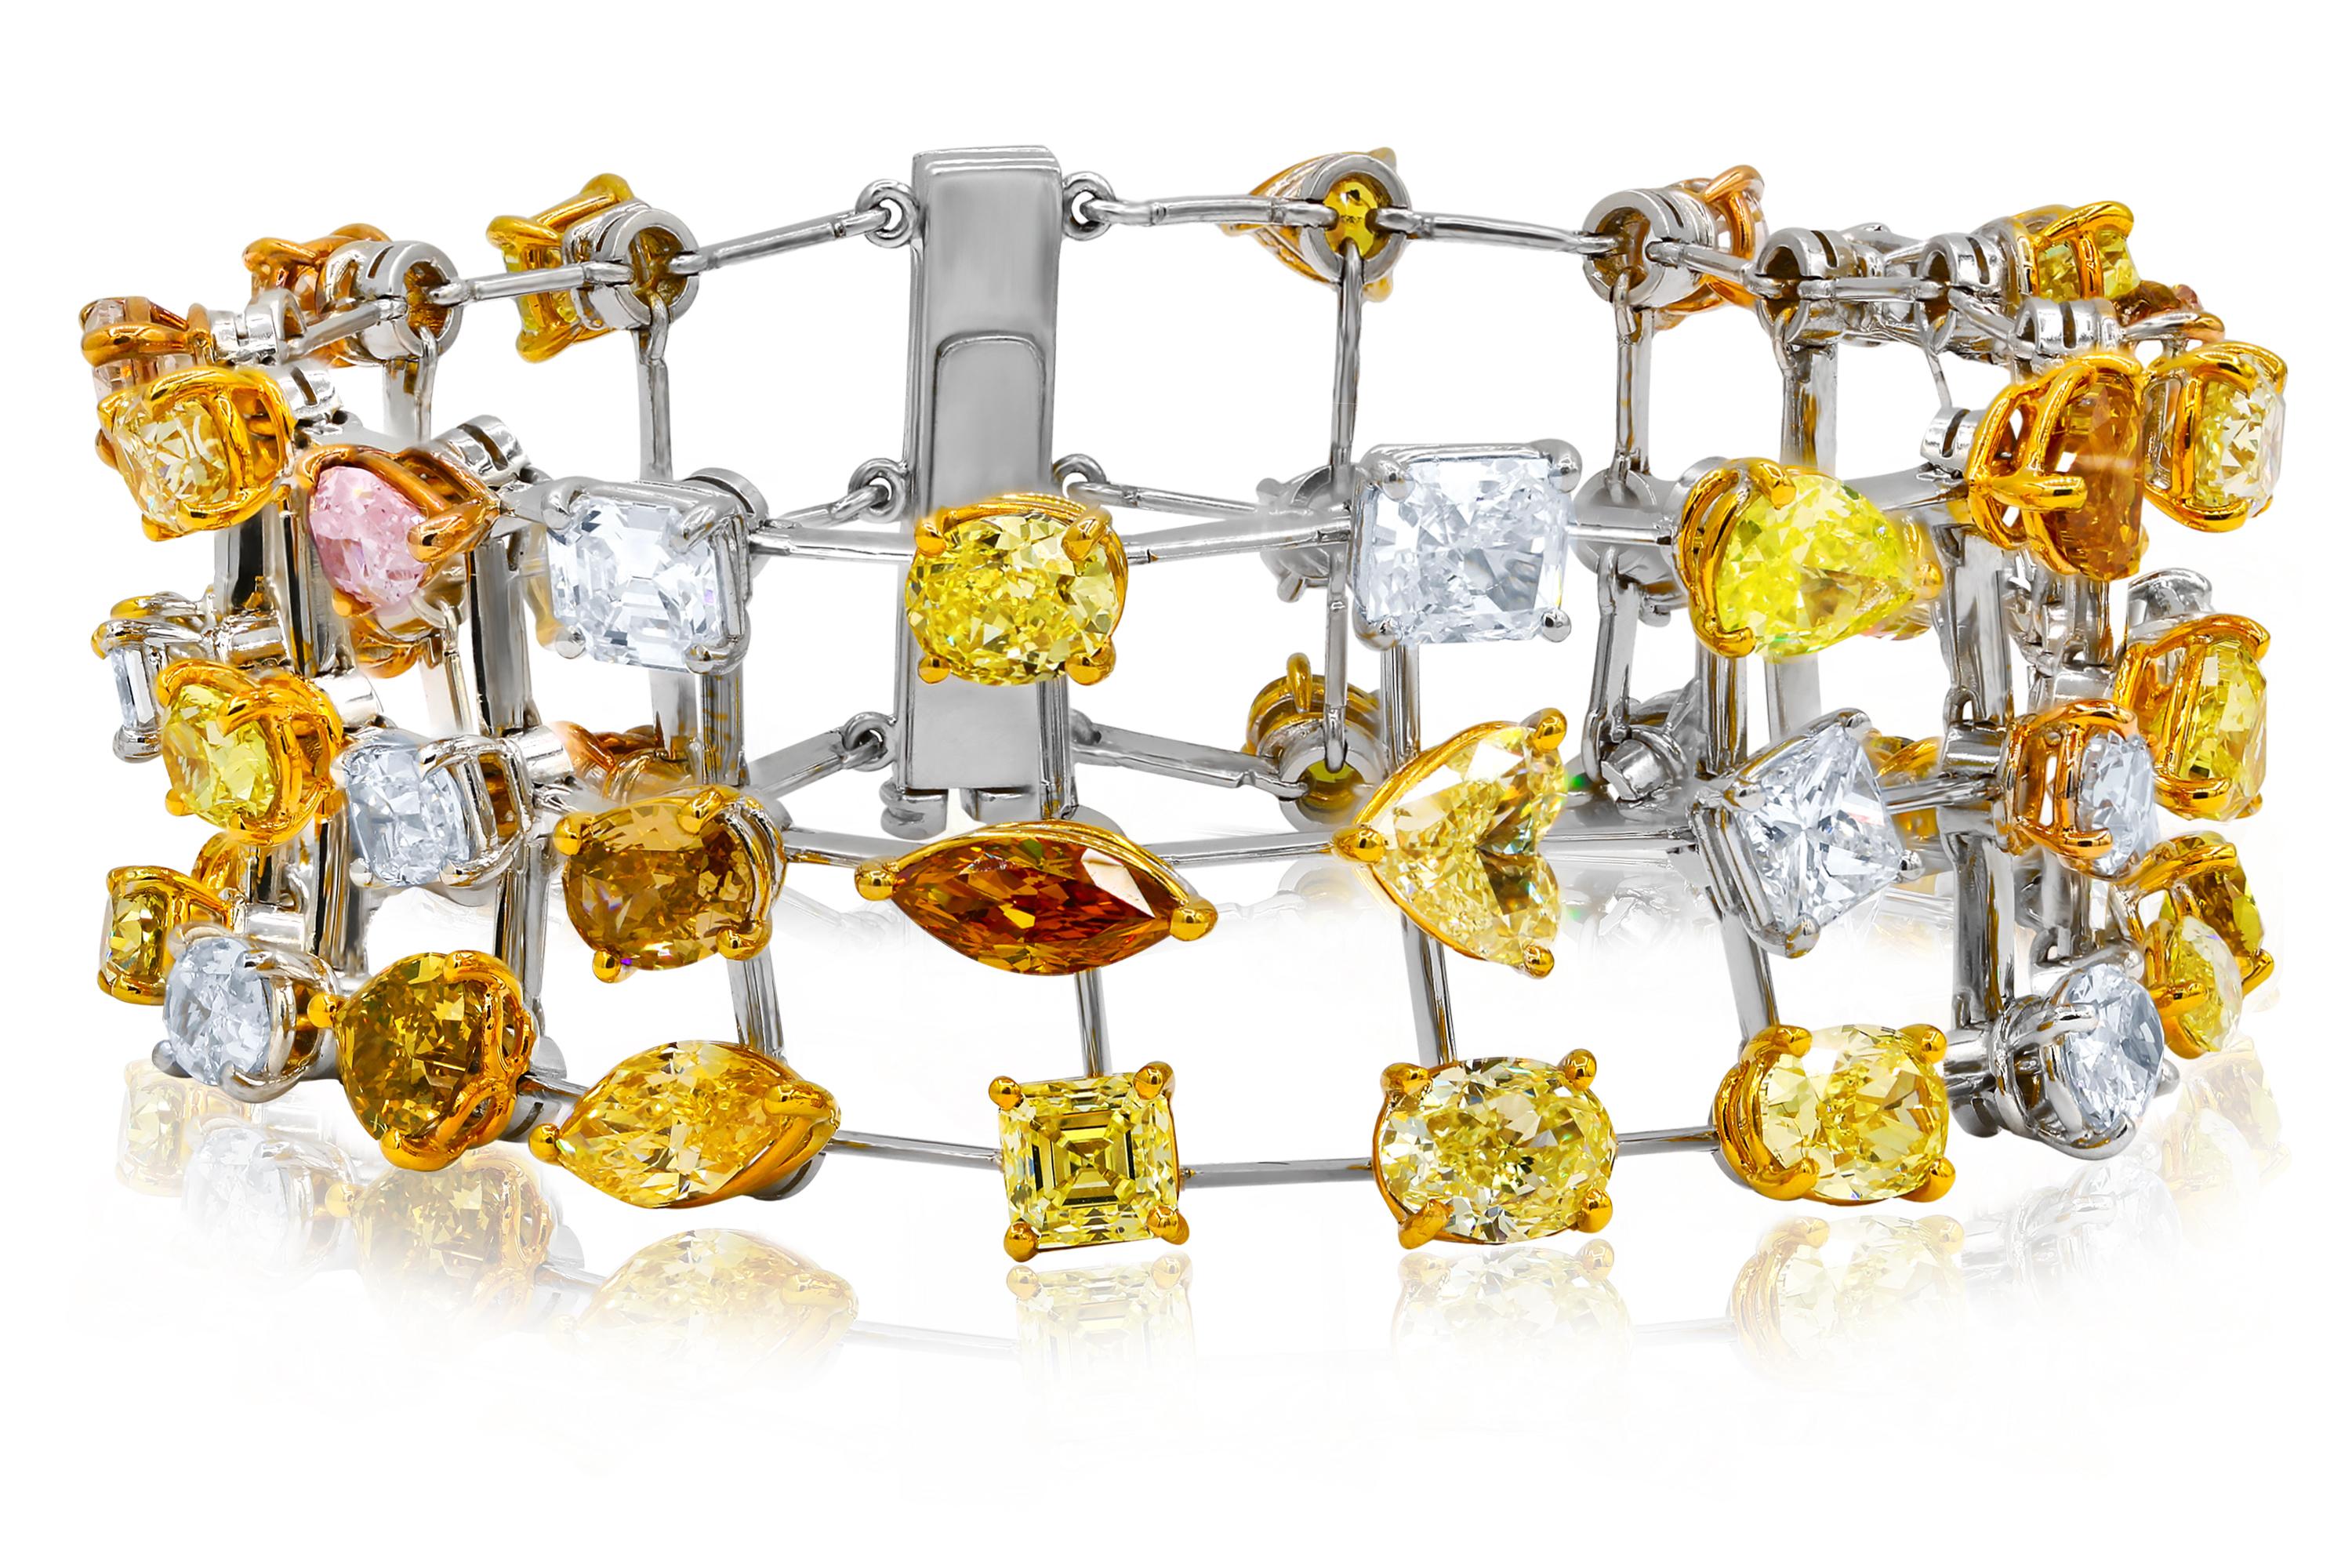 Tri-row multi colored diamond bracelet featuring multi-color and multi-shaped diamonds, totaling 38.00 carats of diamonds, mounted in platinum and 18K gold. Combination of Pink, Yellow White and Brown Diamonds. 
Diana M. is a leading supplier of